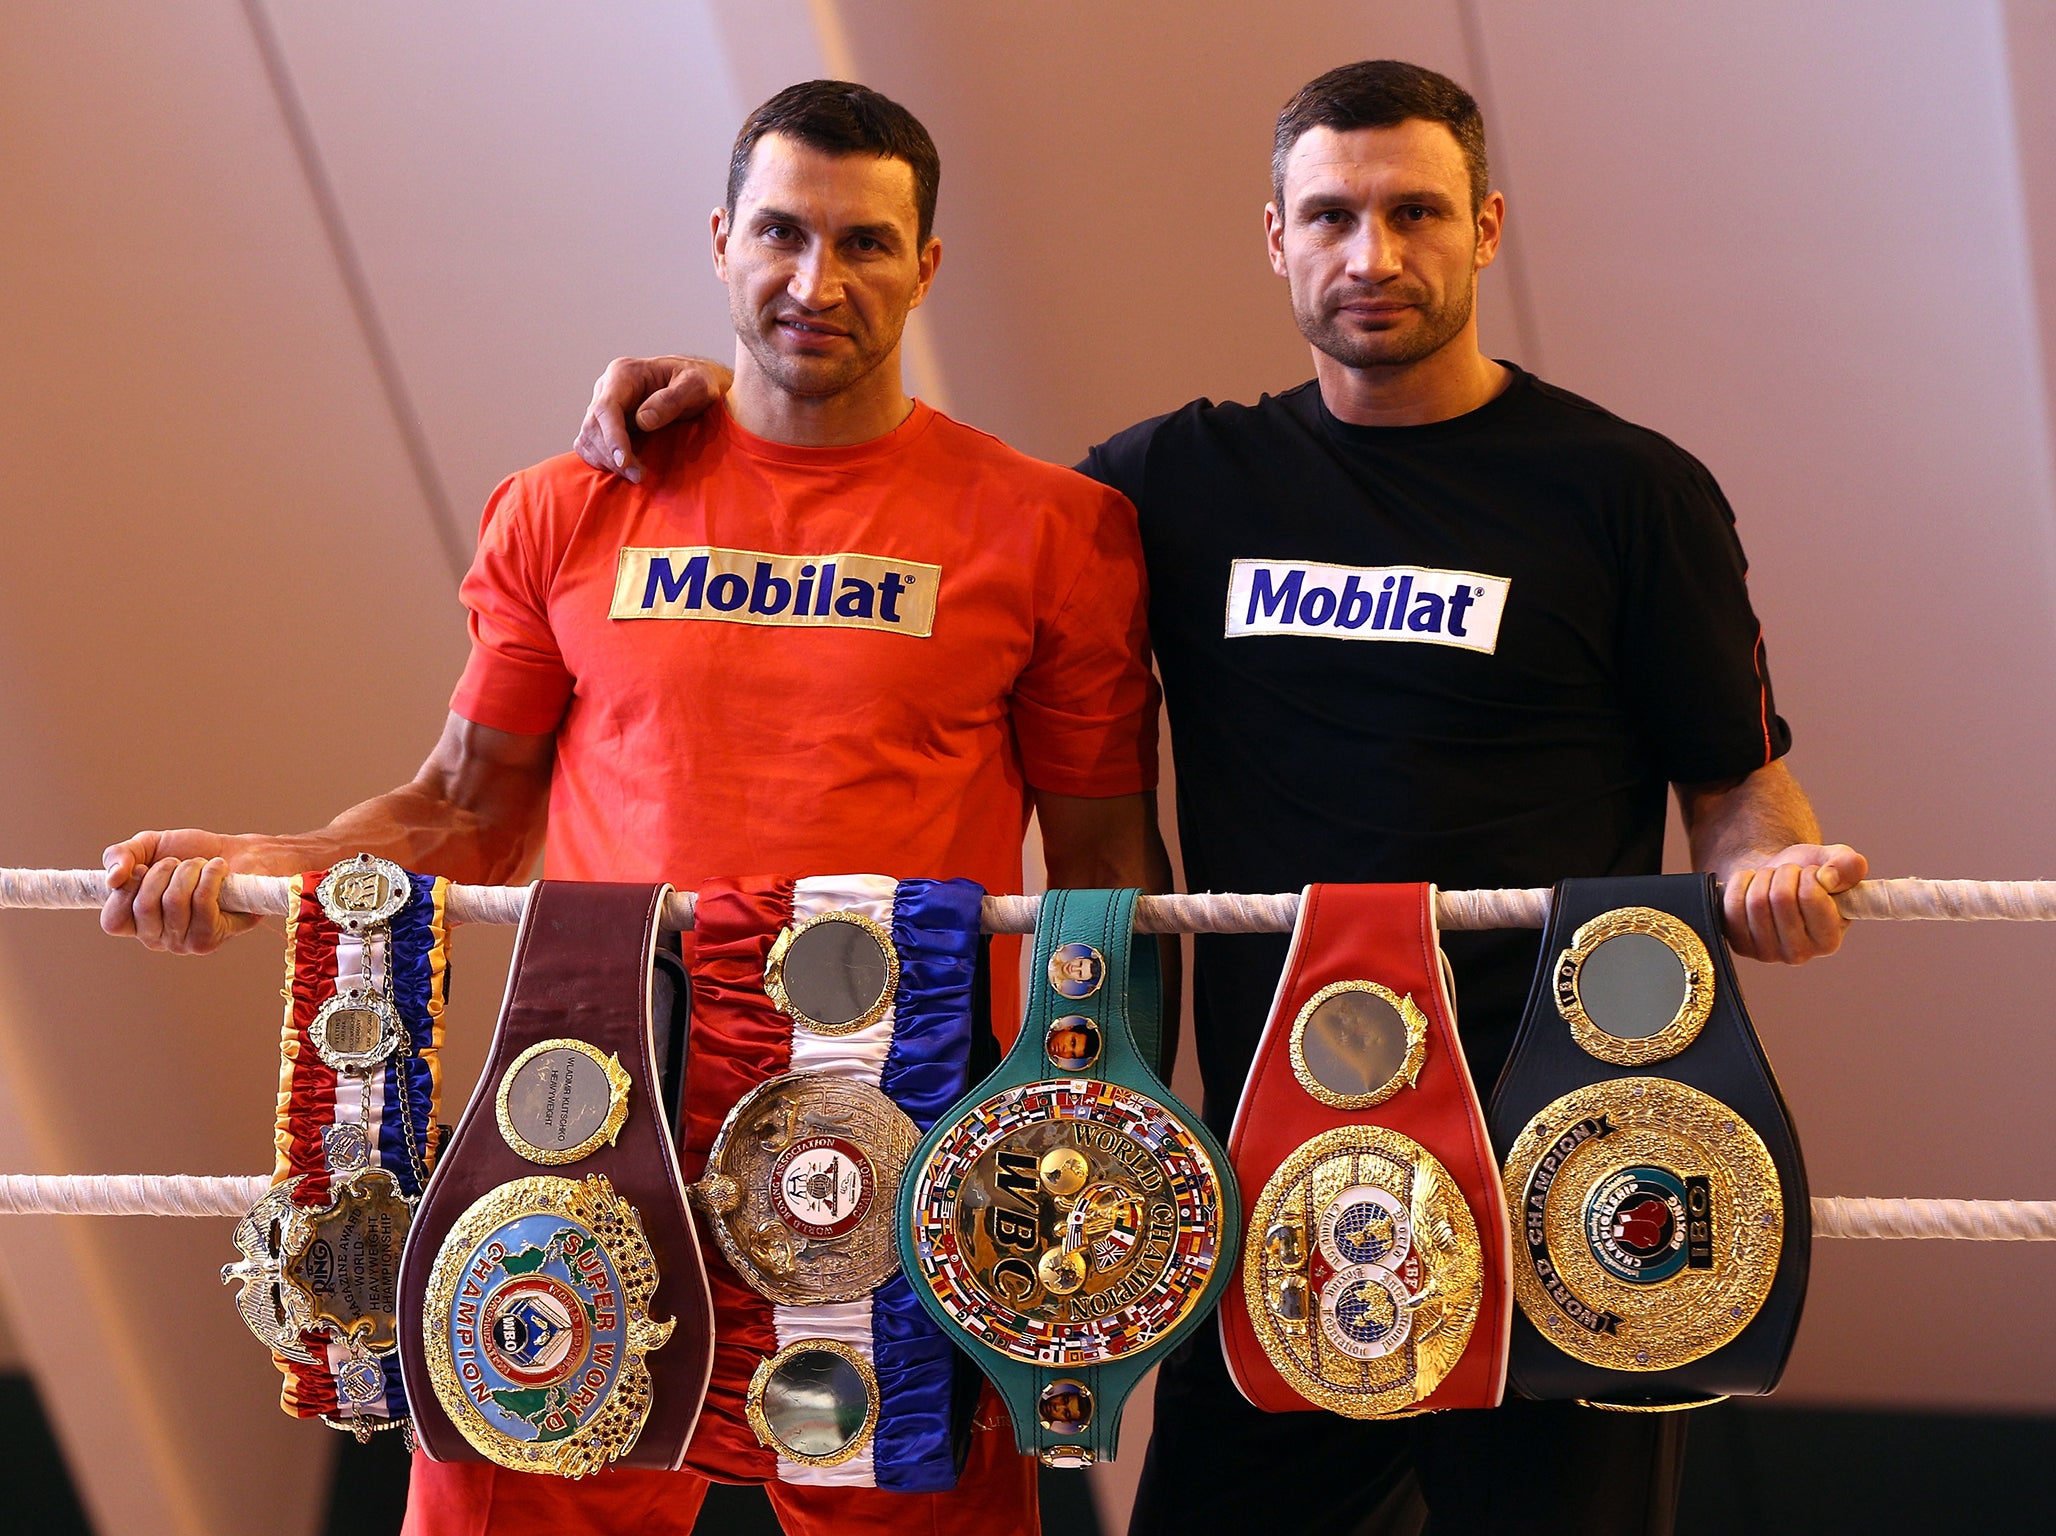 The Klitschko brothers show off their belt collection